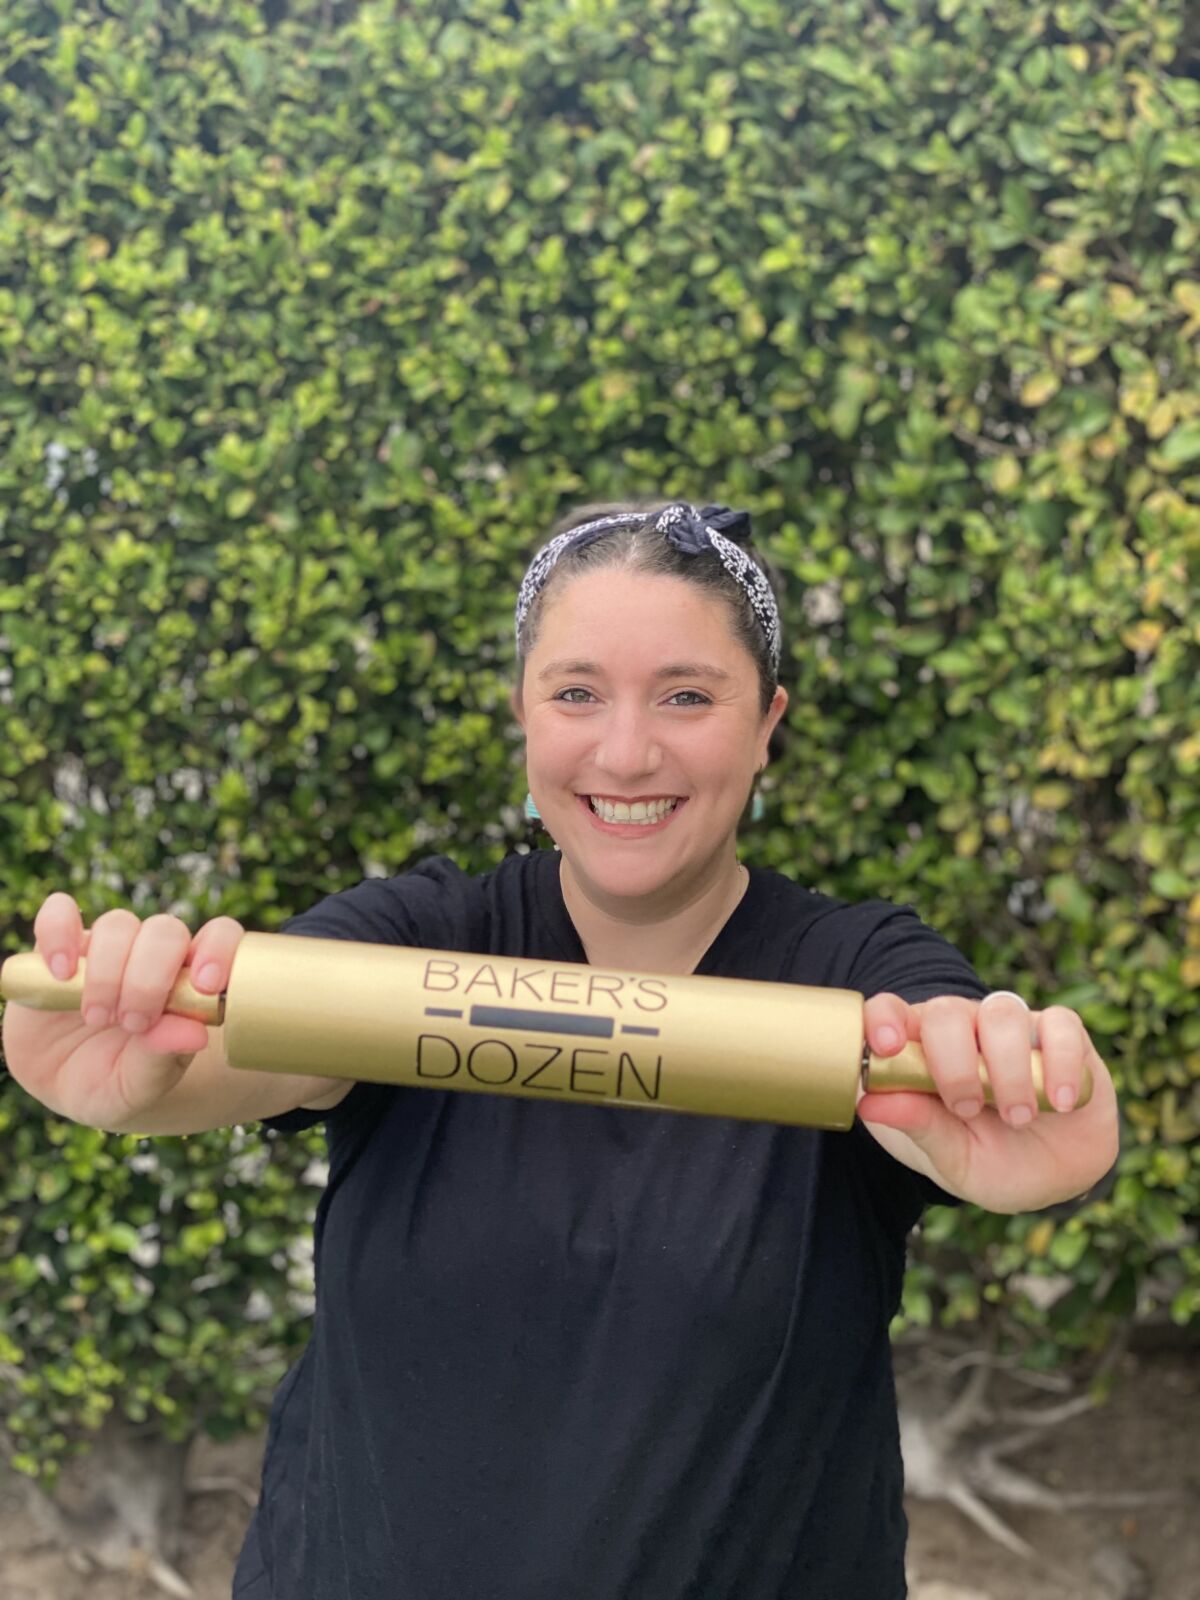 Lisa Altfest won Hulu's "Baker's Dozen" and the golden rolling pin.